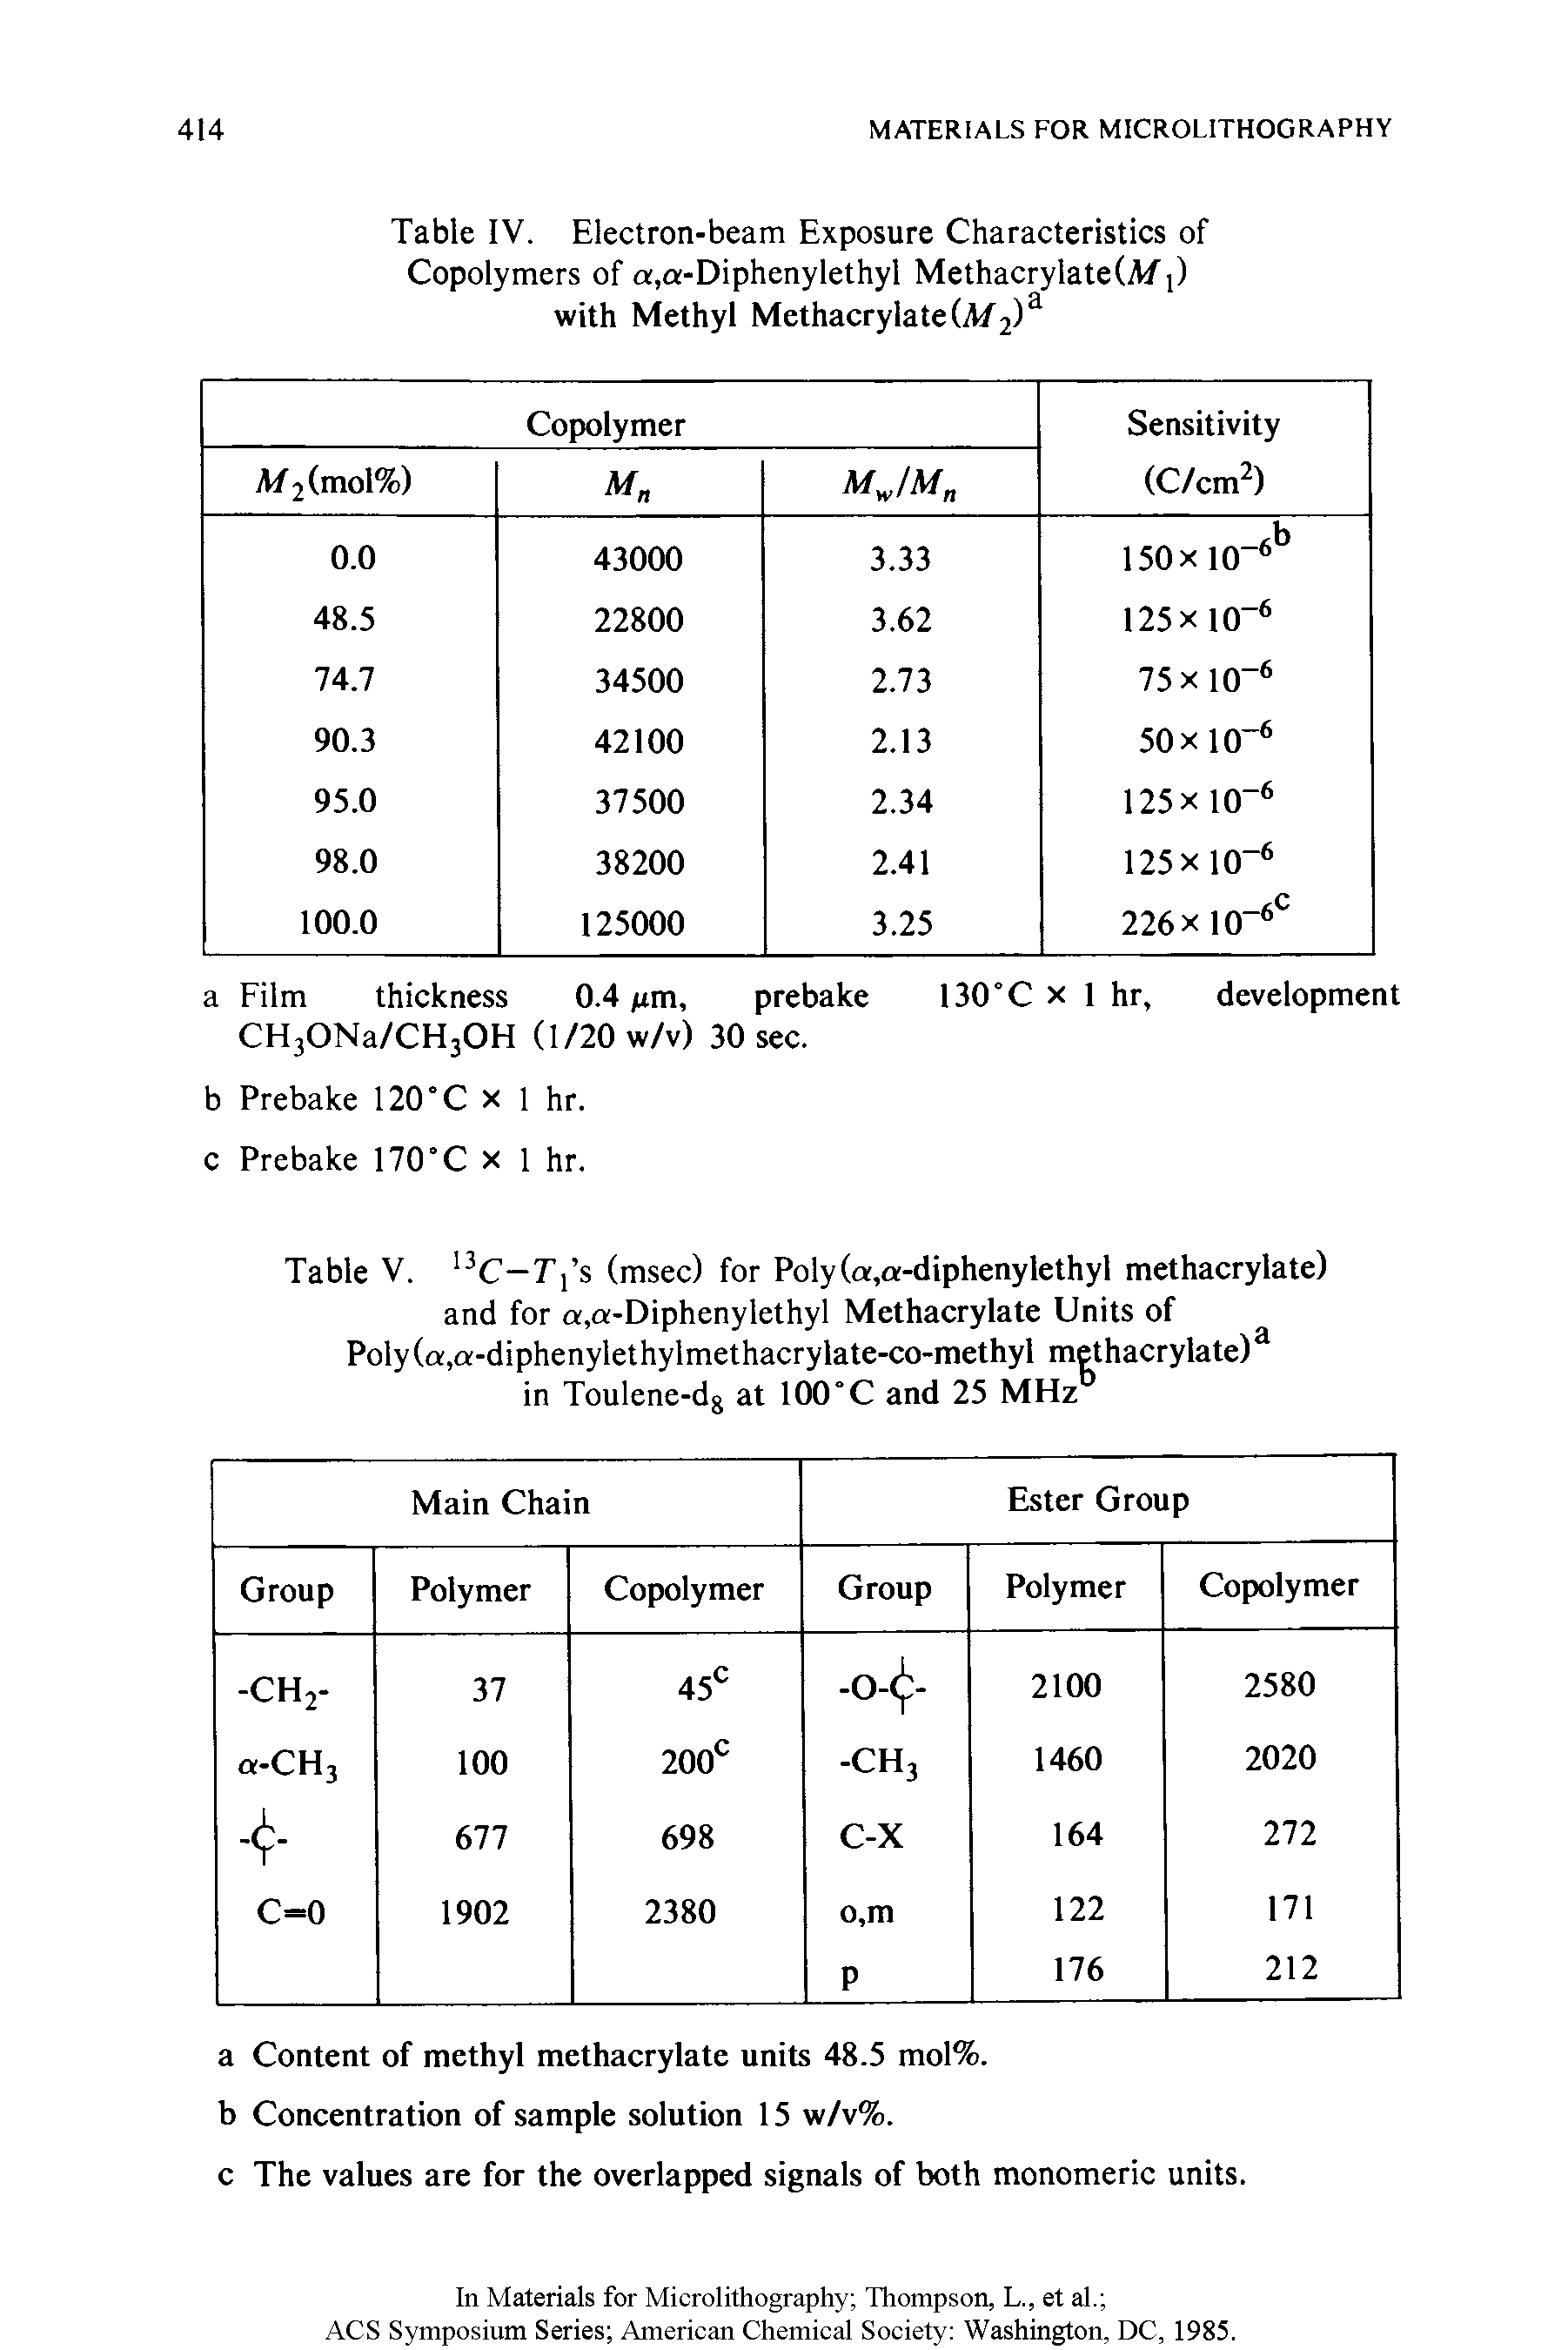 Table V. 13C—Tj s (msec) for Poly(a,a-diphenylethyl methacrylate) and for a,a-Diphenylethyl Methacrylate Units of Poly(a,a-diphenylethylmethacrylate-co-methyl methacrylate) in Toulene-do at 100°C and 25 MHz...